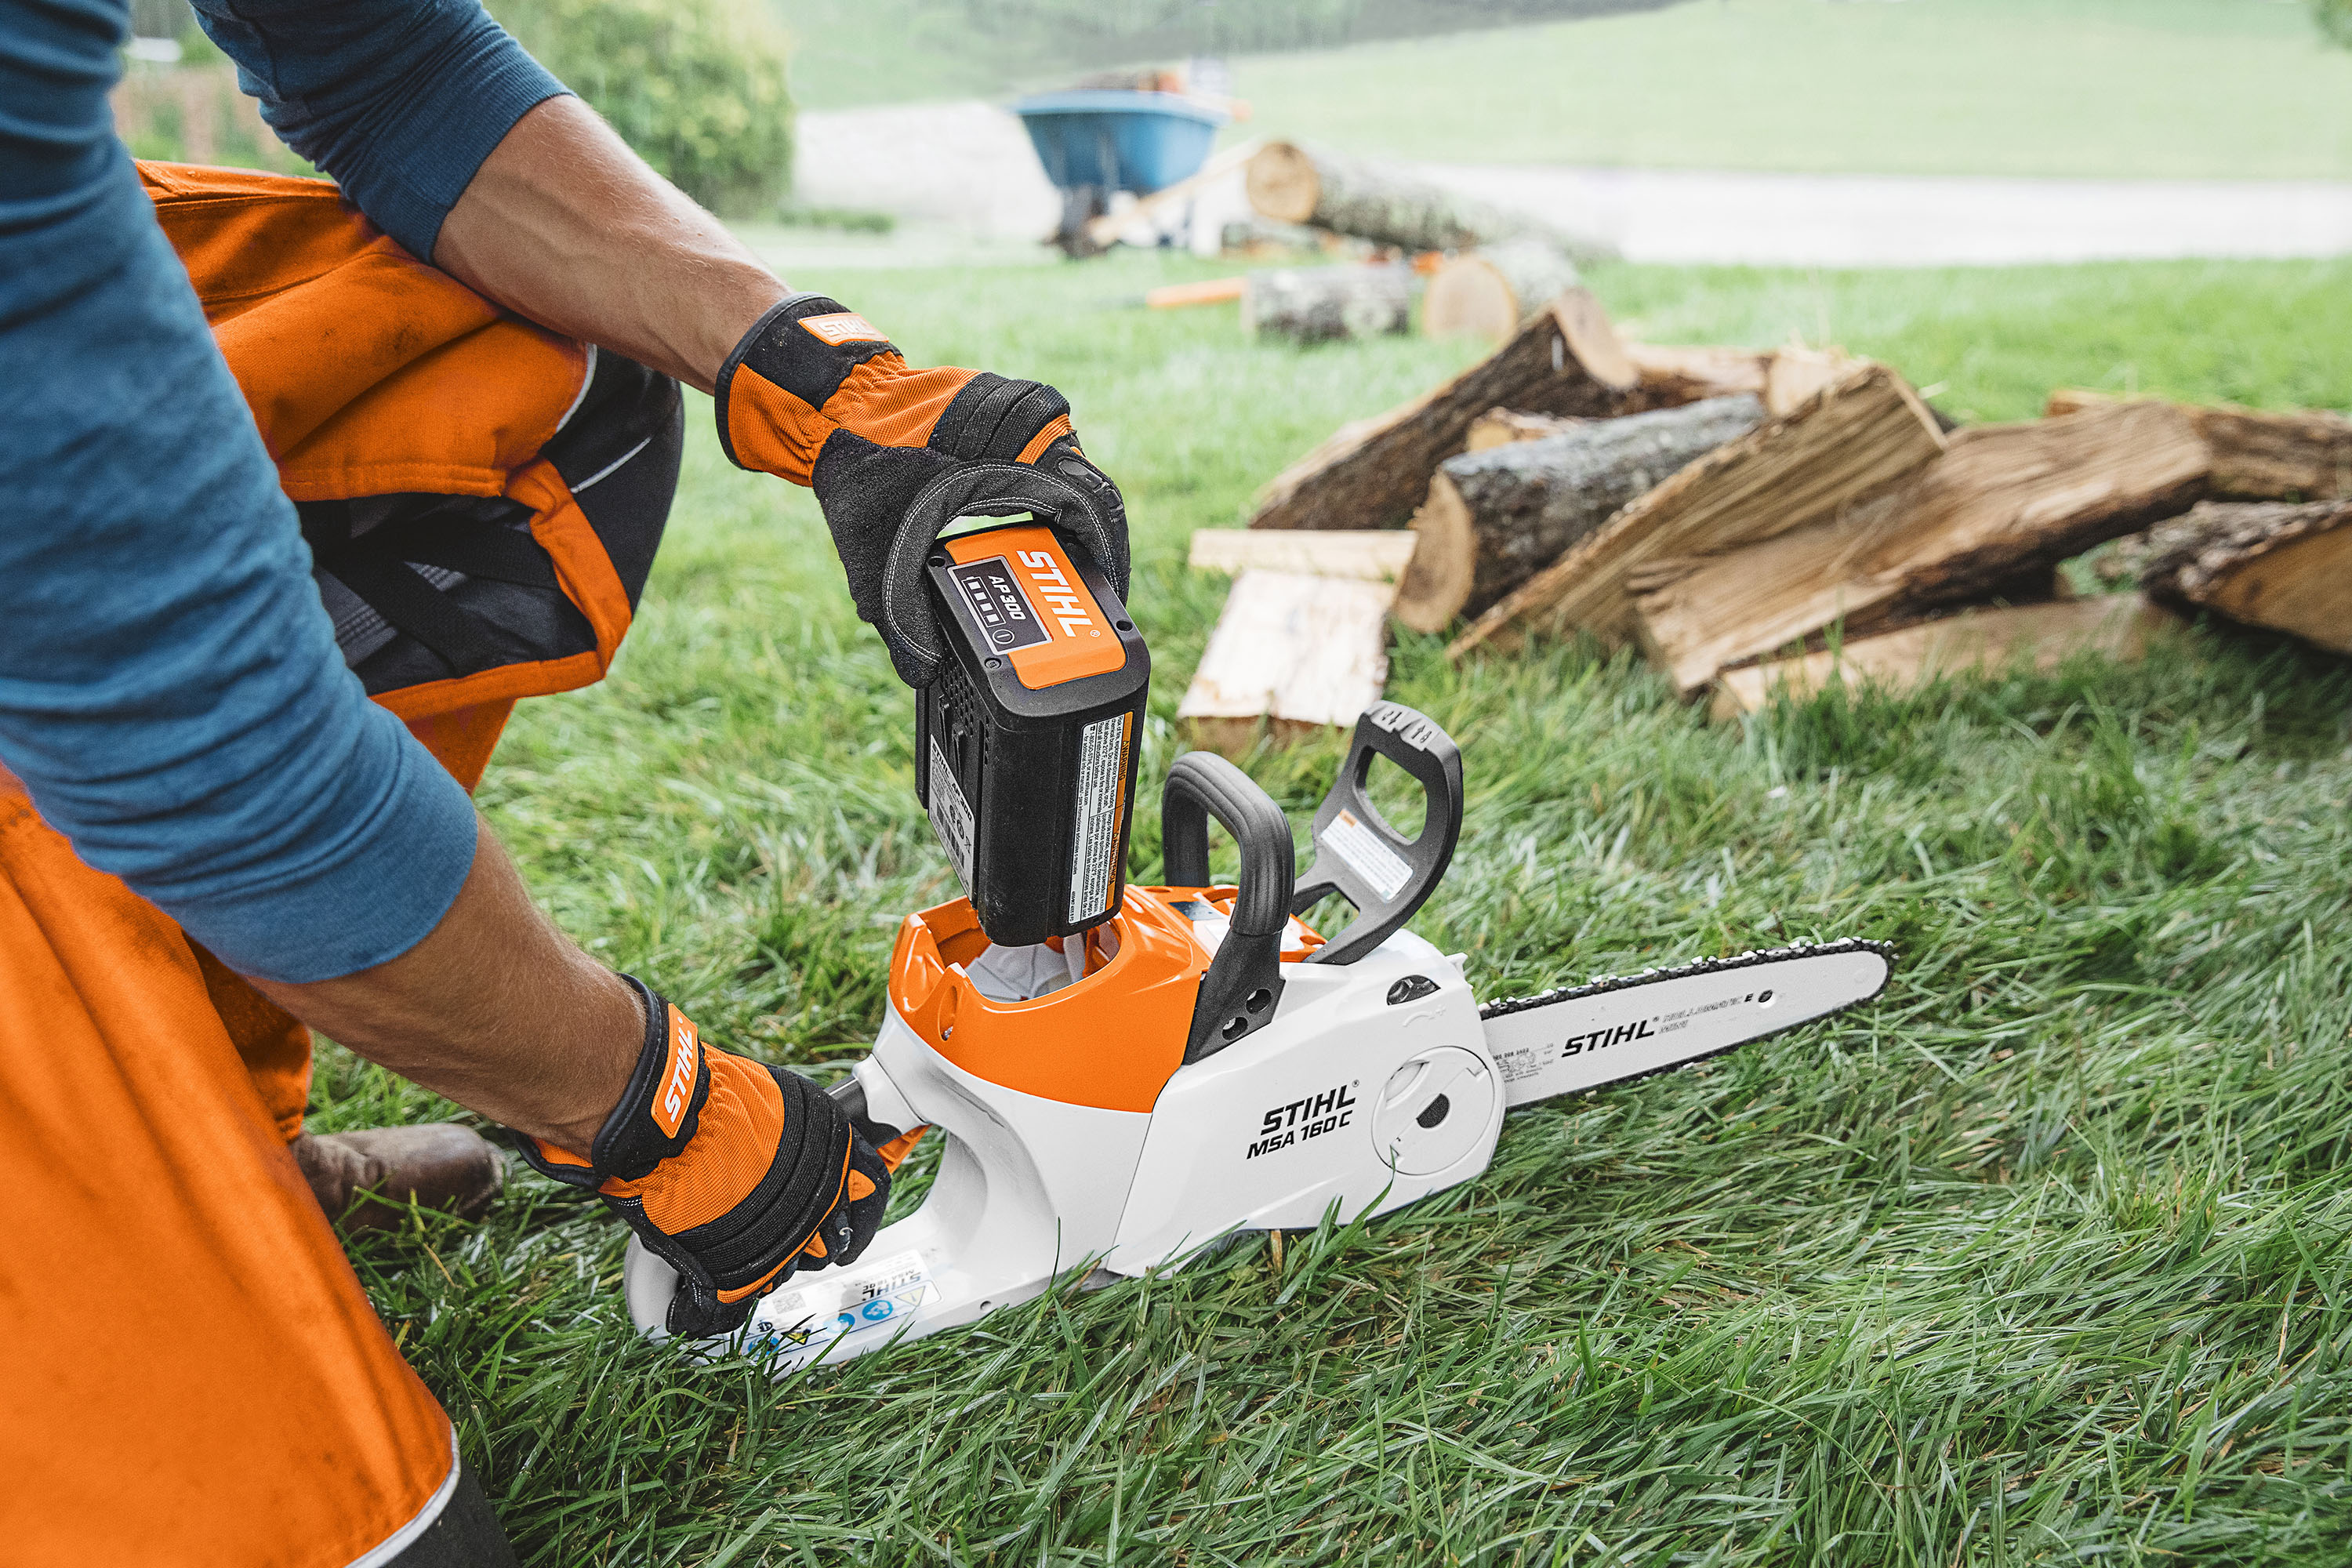 STIHL Chainsaws, the #1 Selling Brand of Chainsaws Worldwide 